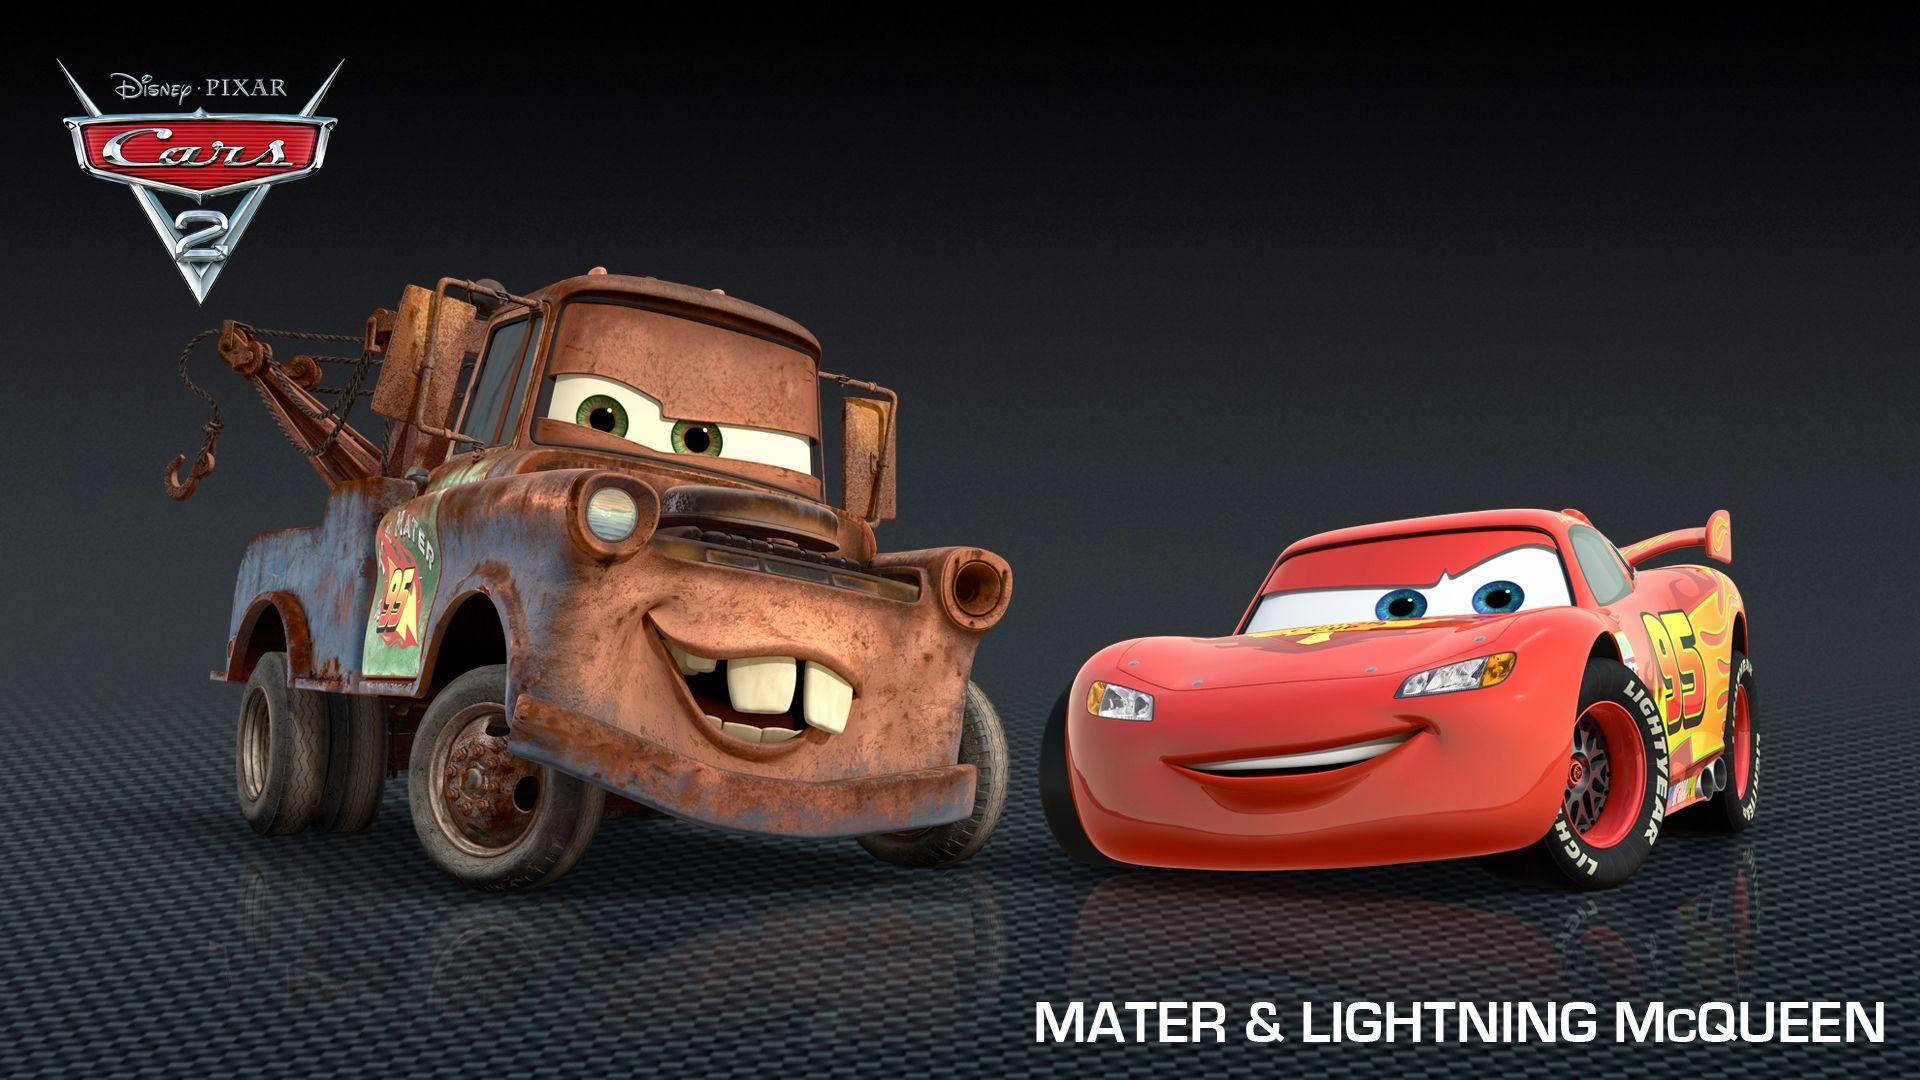 Disney 1920x1080 Hd Cars Lightning Mcqueen And Mater Background